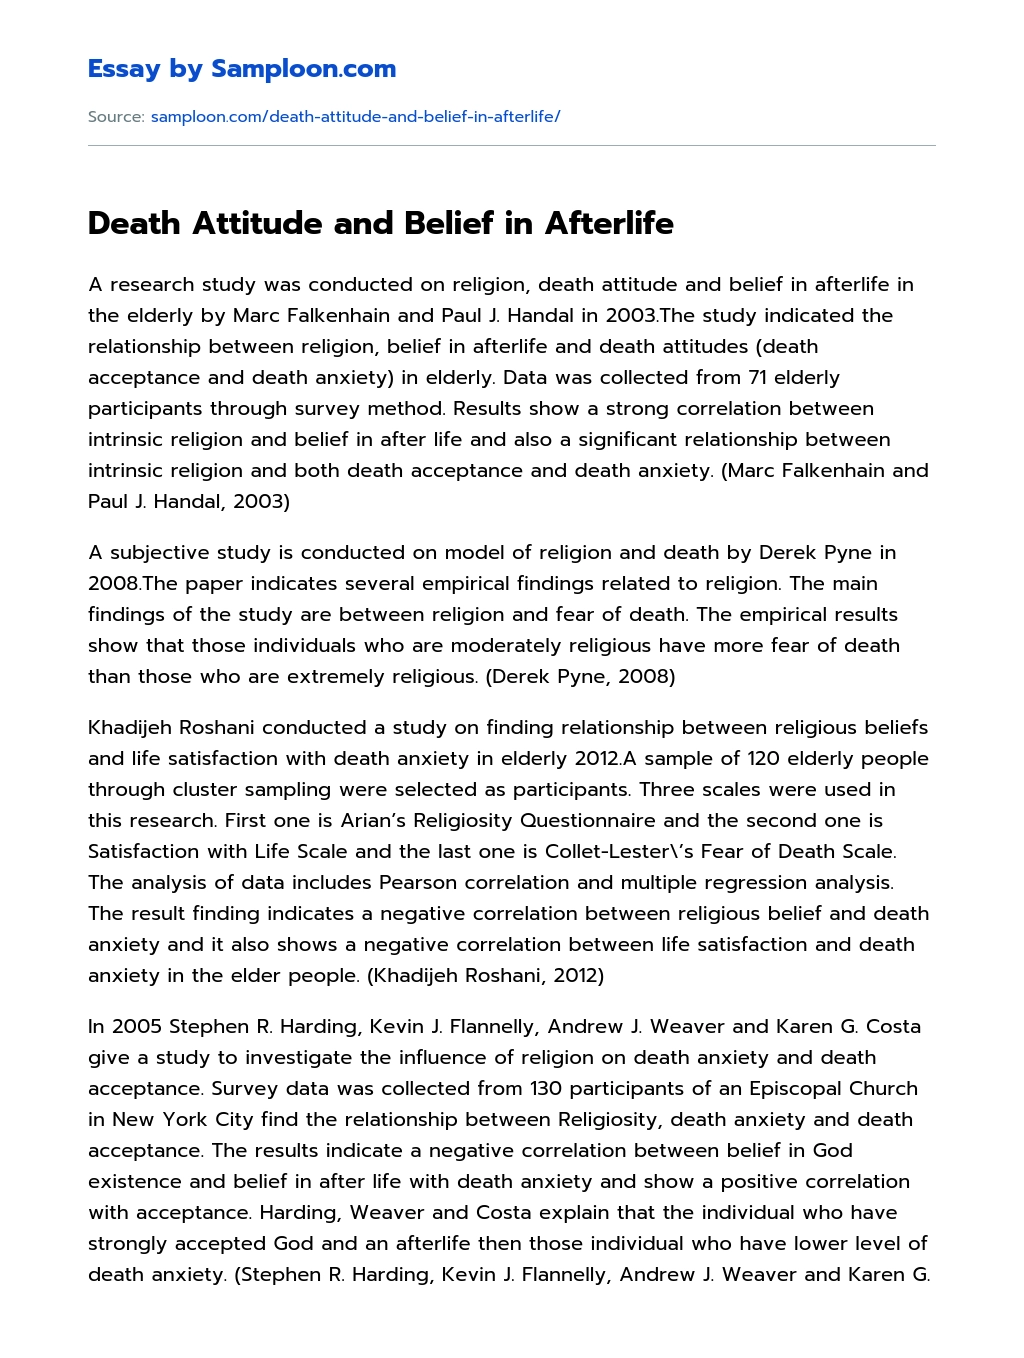 Death Attitude and Belief in Afterlife essay